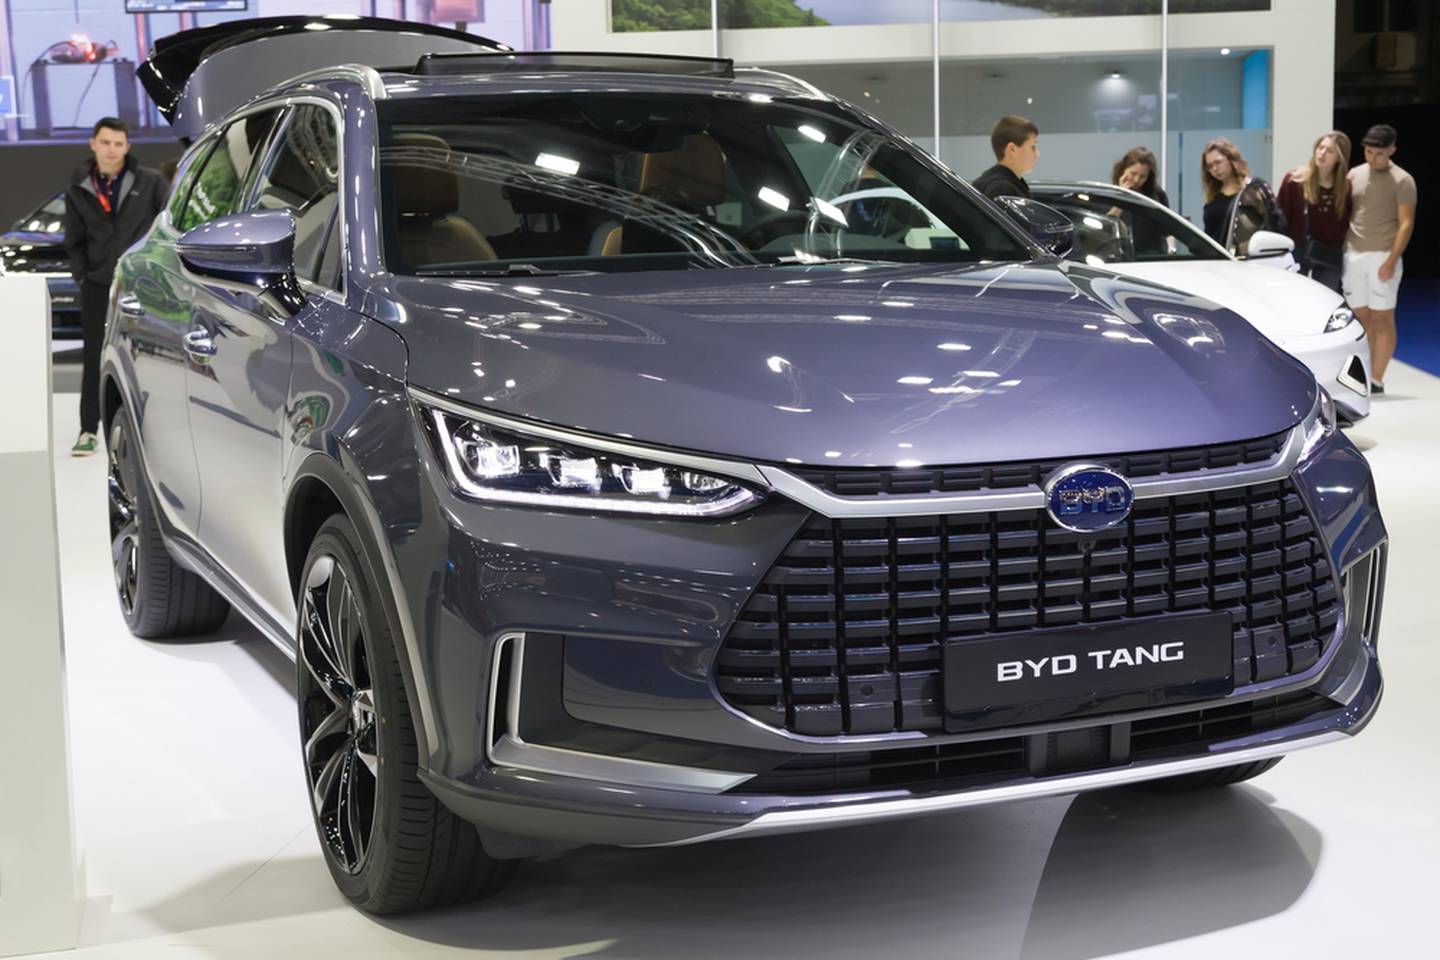 US examines potential security risks from Chinese car technology